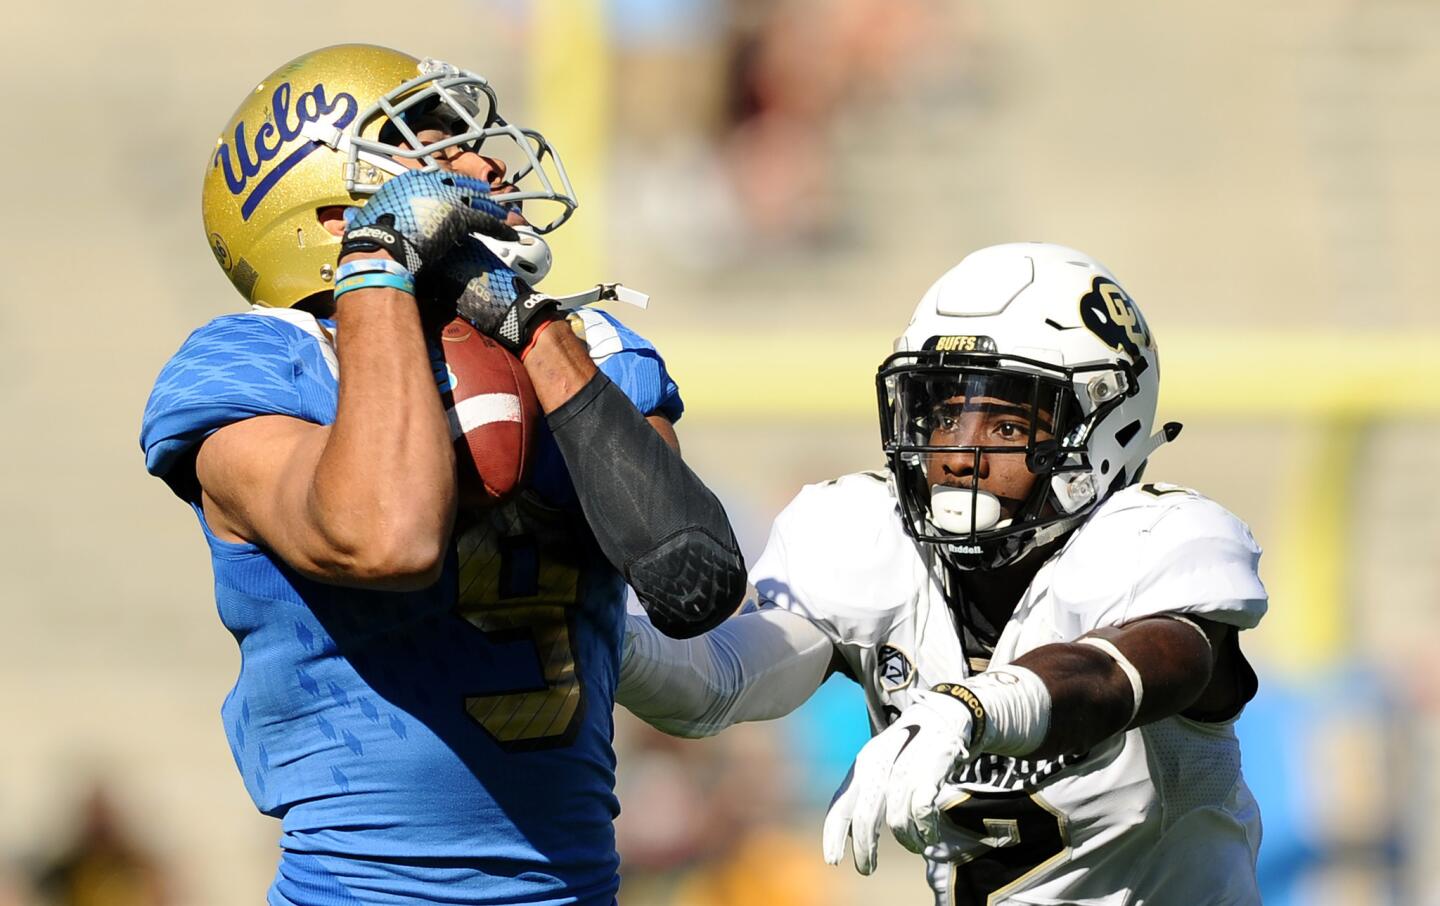 Jordan Payton is in on pace to break UCLA's all-time receptions record